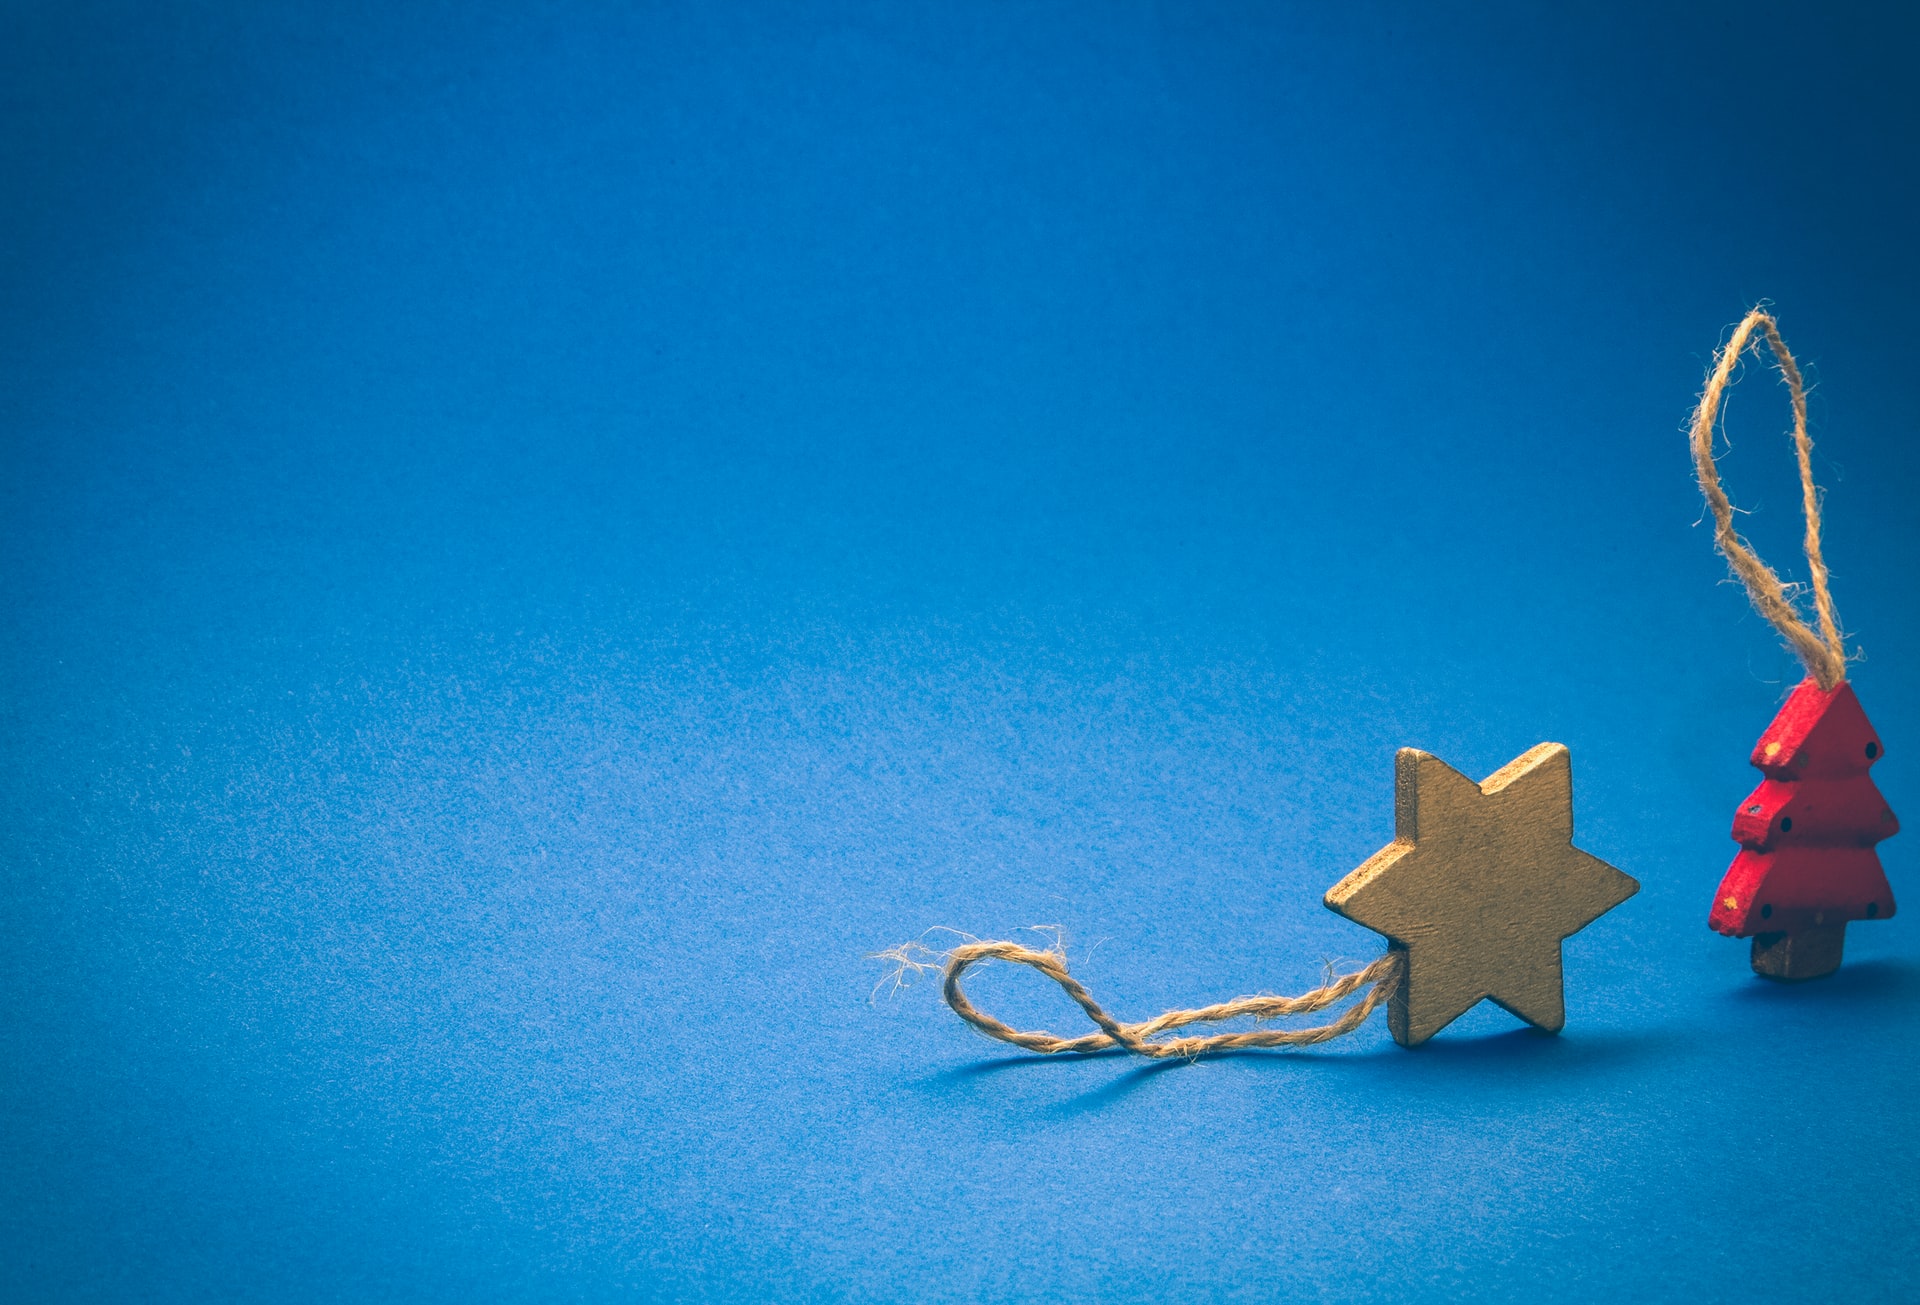 Wooden star and Christmas tree ornaments.